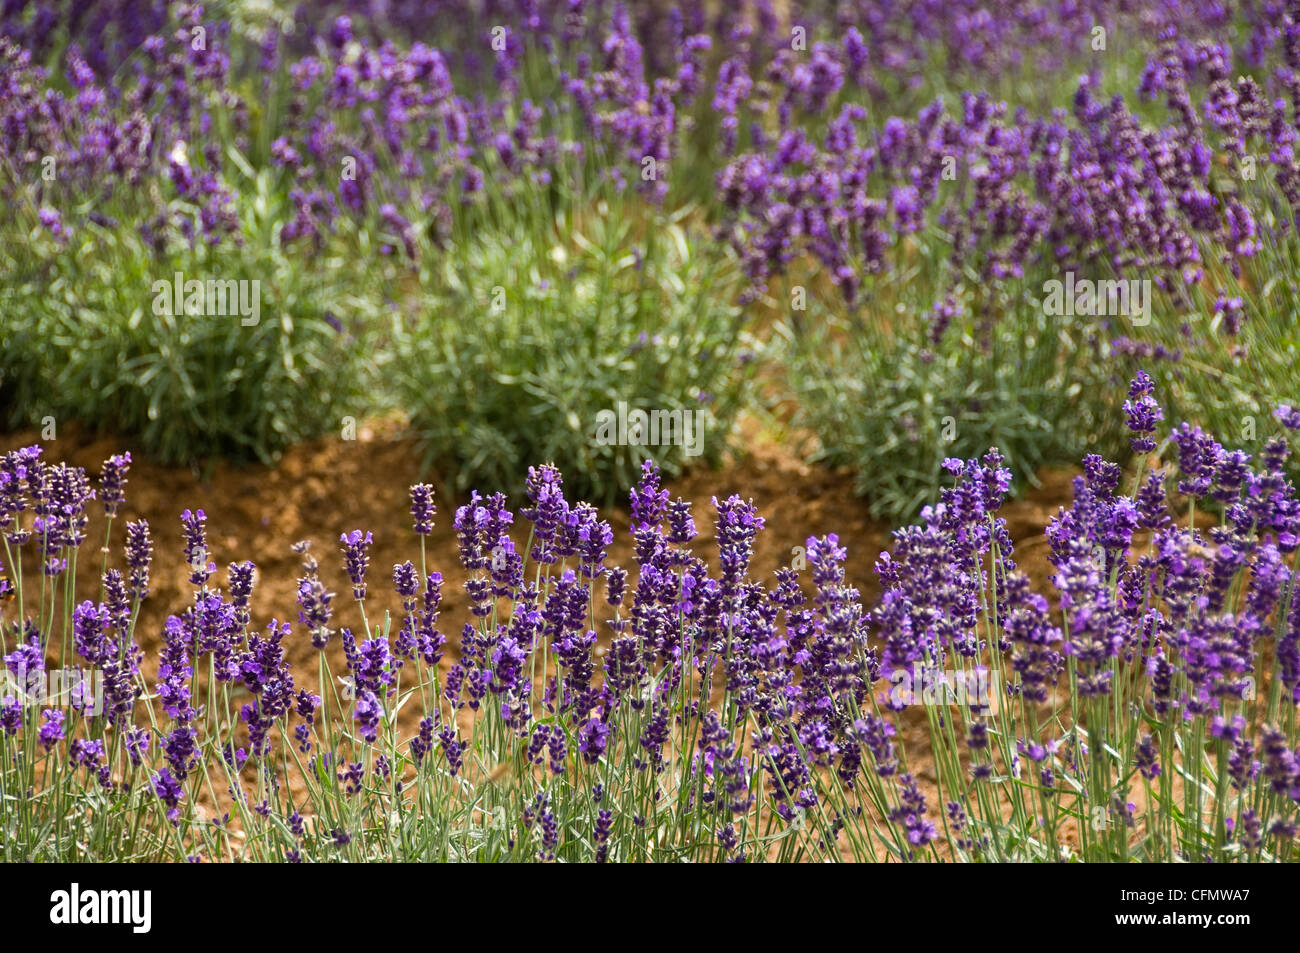 Horizontal wide angle view of a field full of flowering English Lavender, Lavandula angustifolia, in the sunshine. Stock Photo